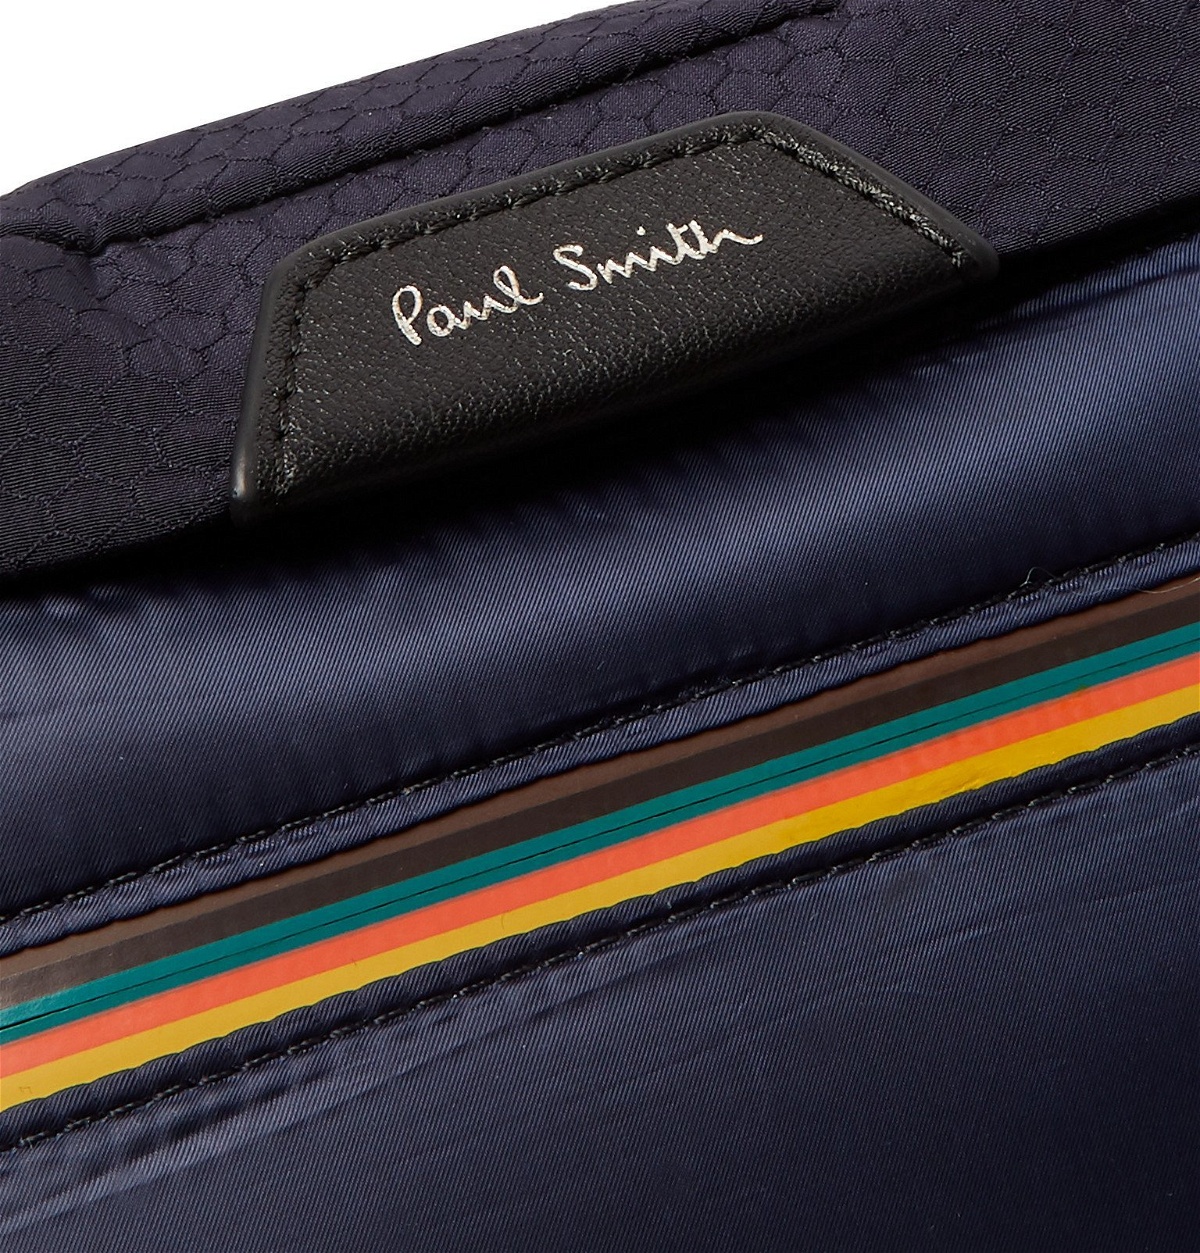 Paul Smith - Leather-Trimmed Ripstop and Shell Belt Bag - Blue